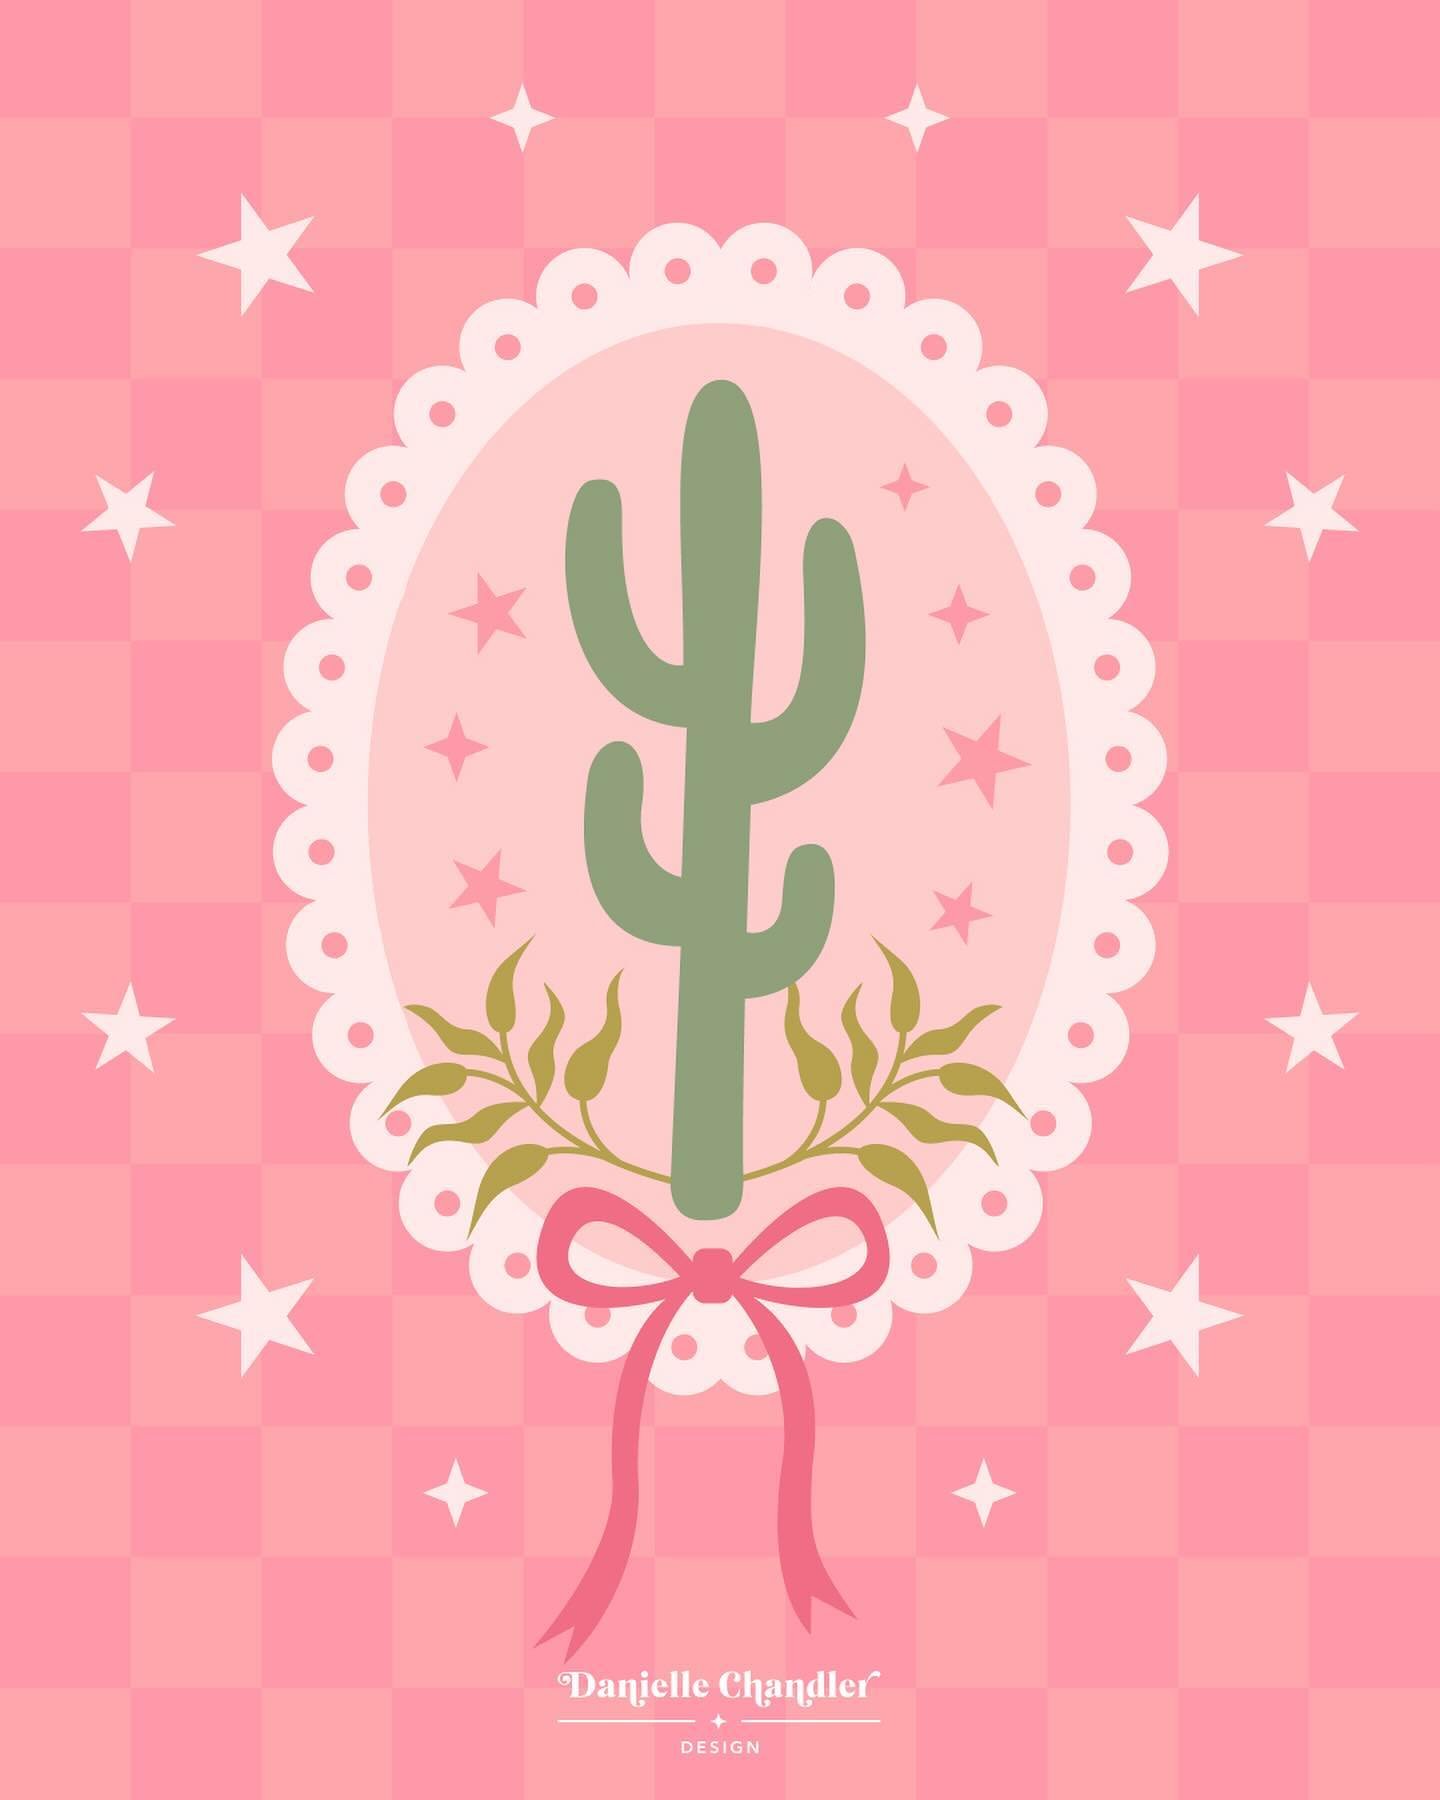 Western whimsy 🌵🎀

A cute cactus motif from a new pattern I&rsquo;m working on for my Coquette Cowgirl collection!